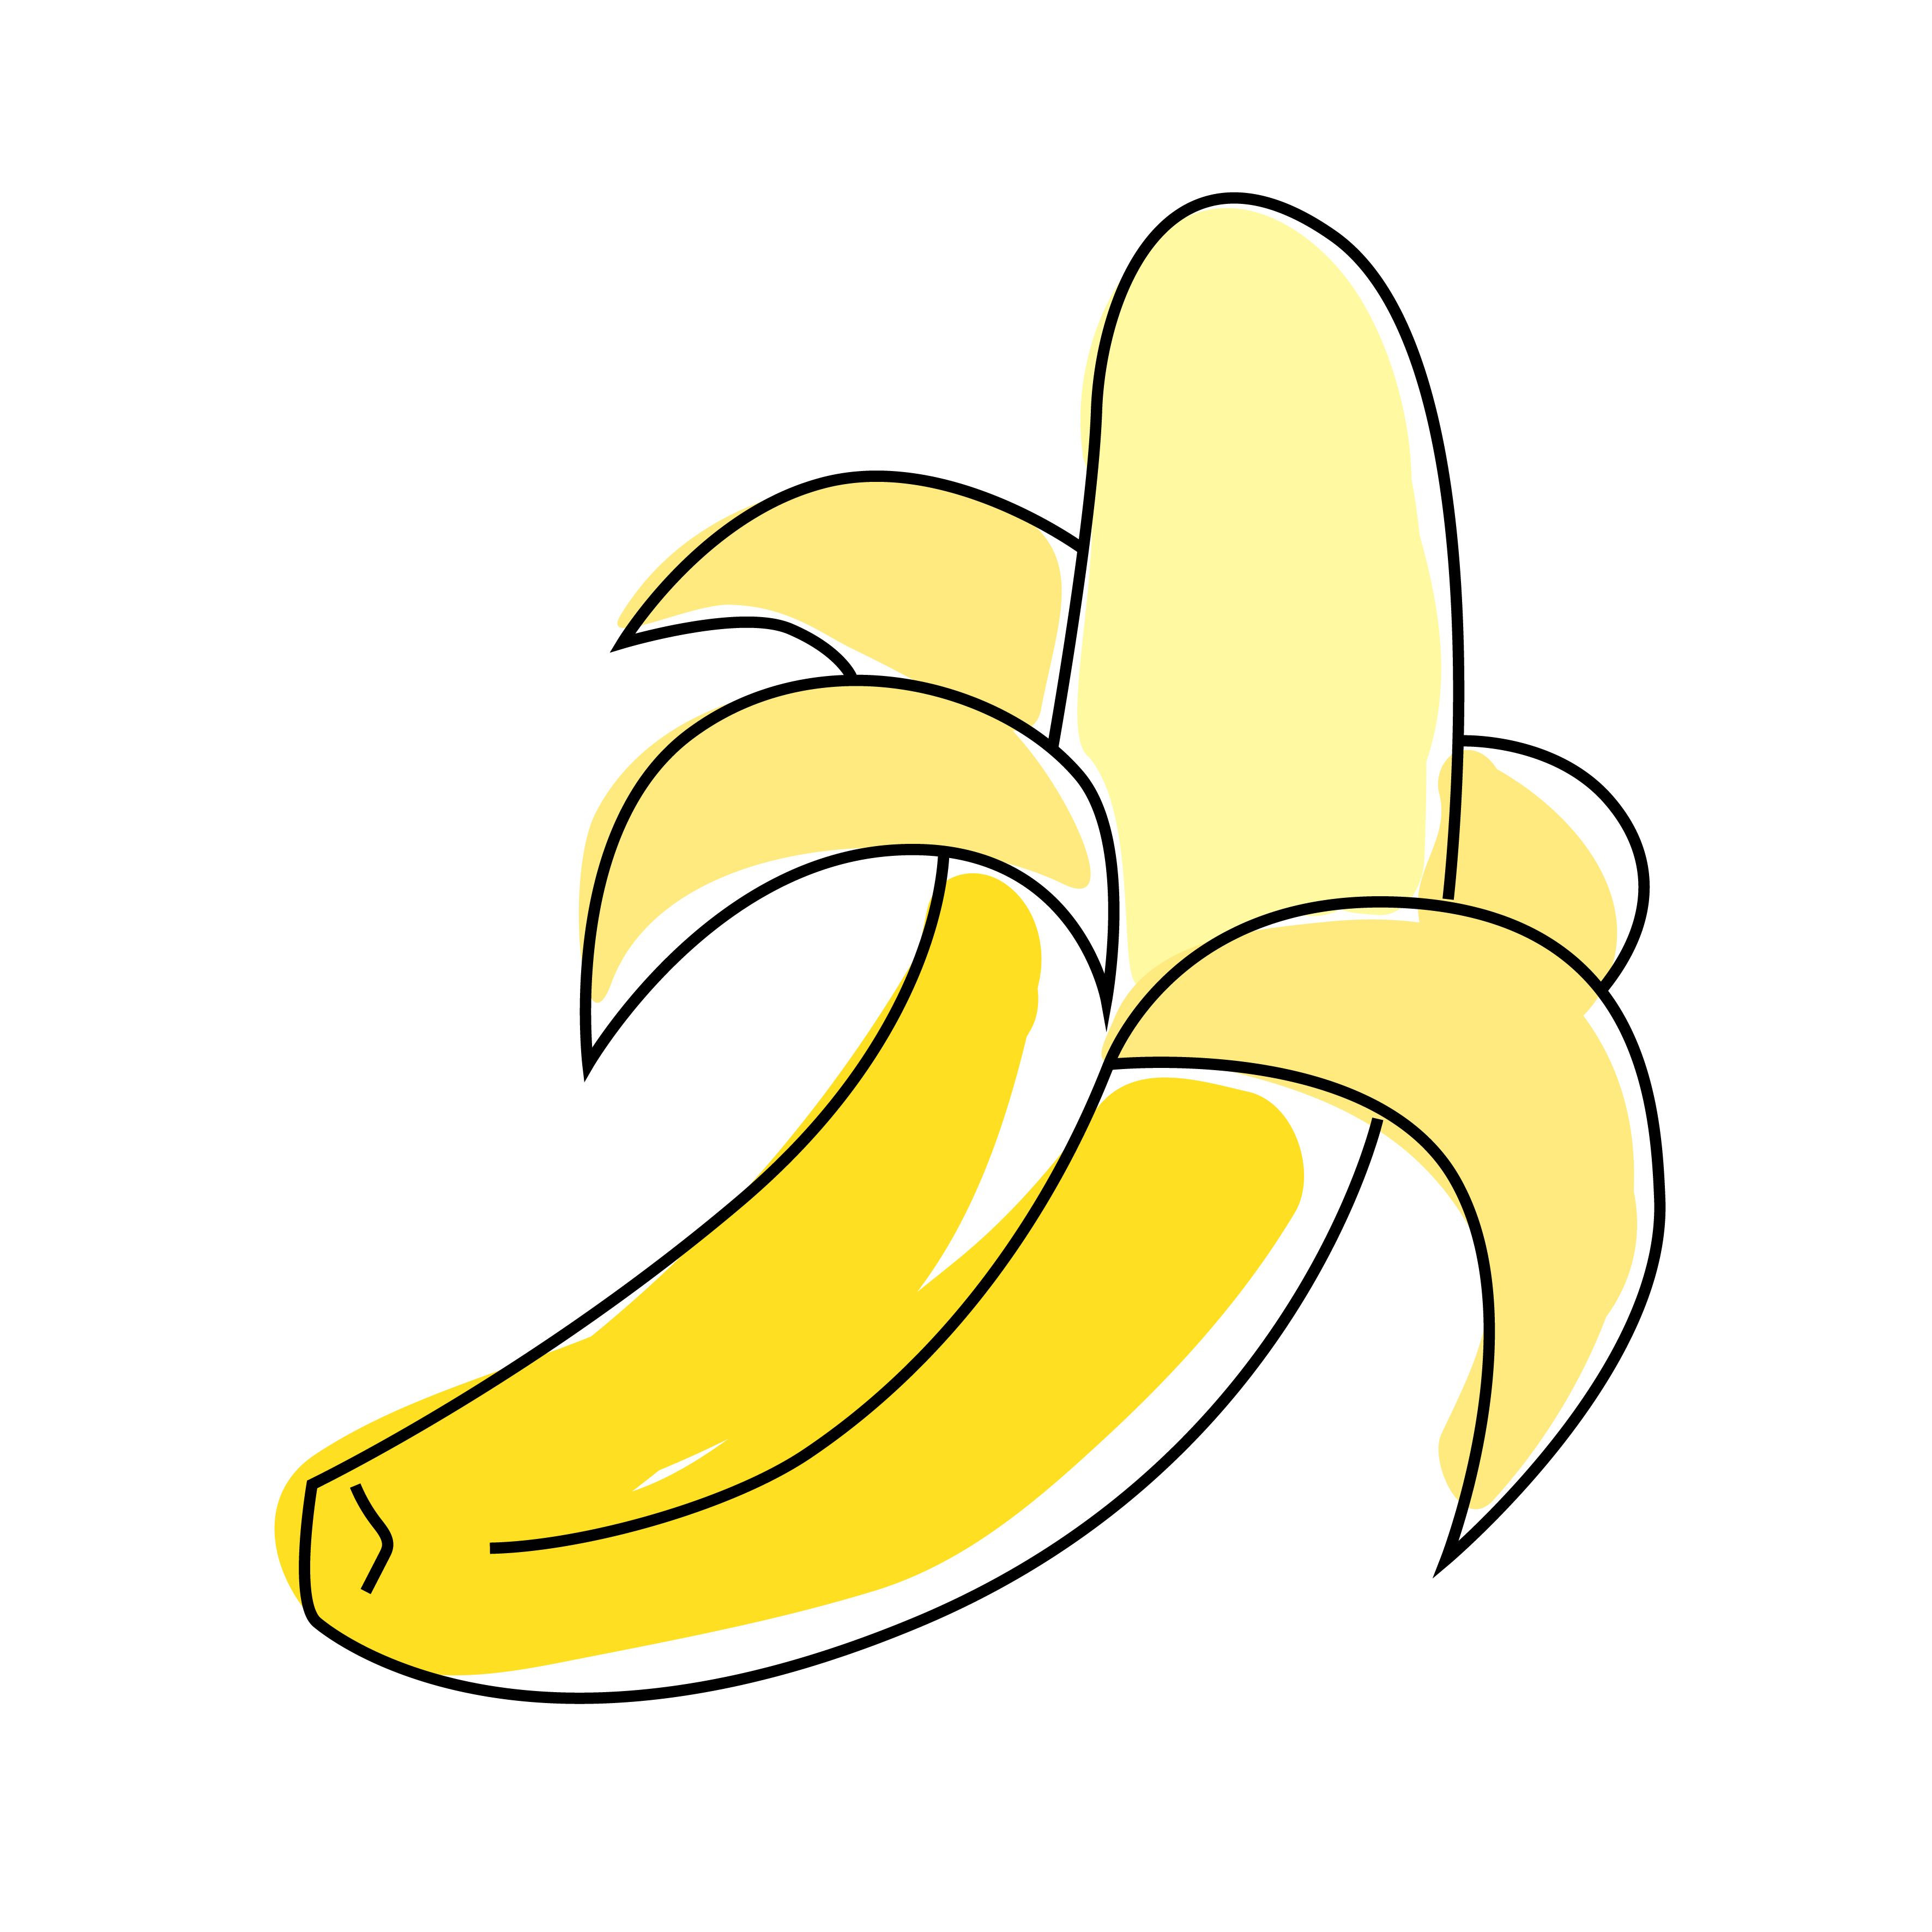 Banana Fruit Sticker by nirmarx for iOS & Android | GIPHY